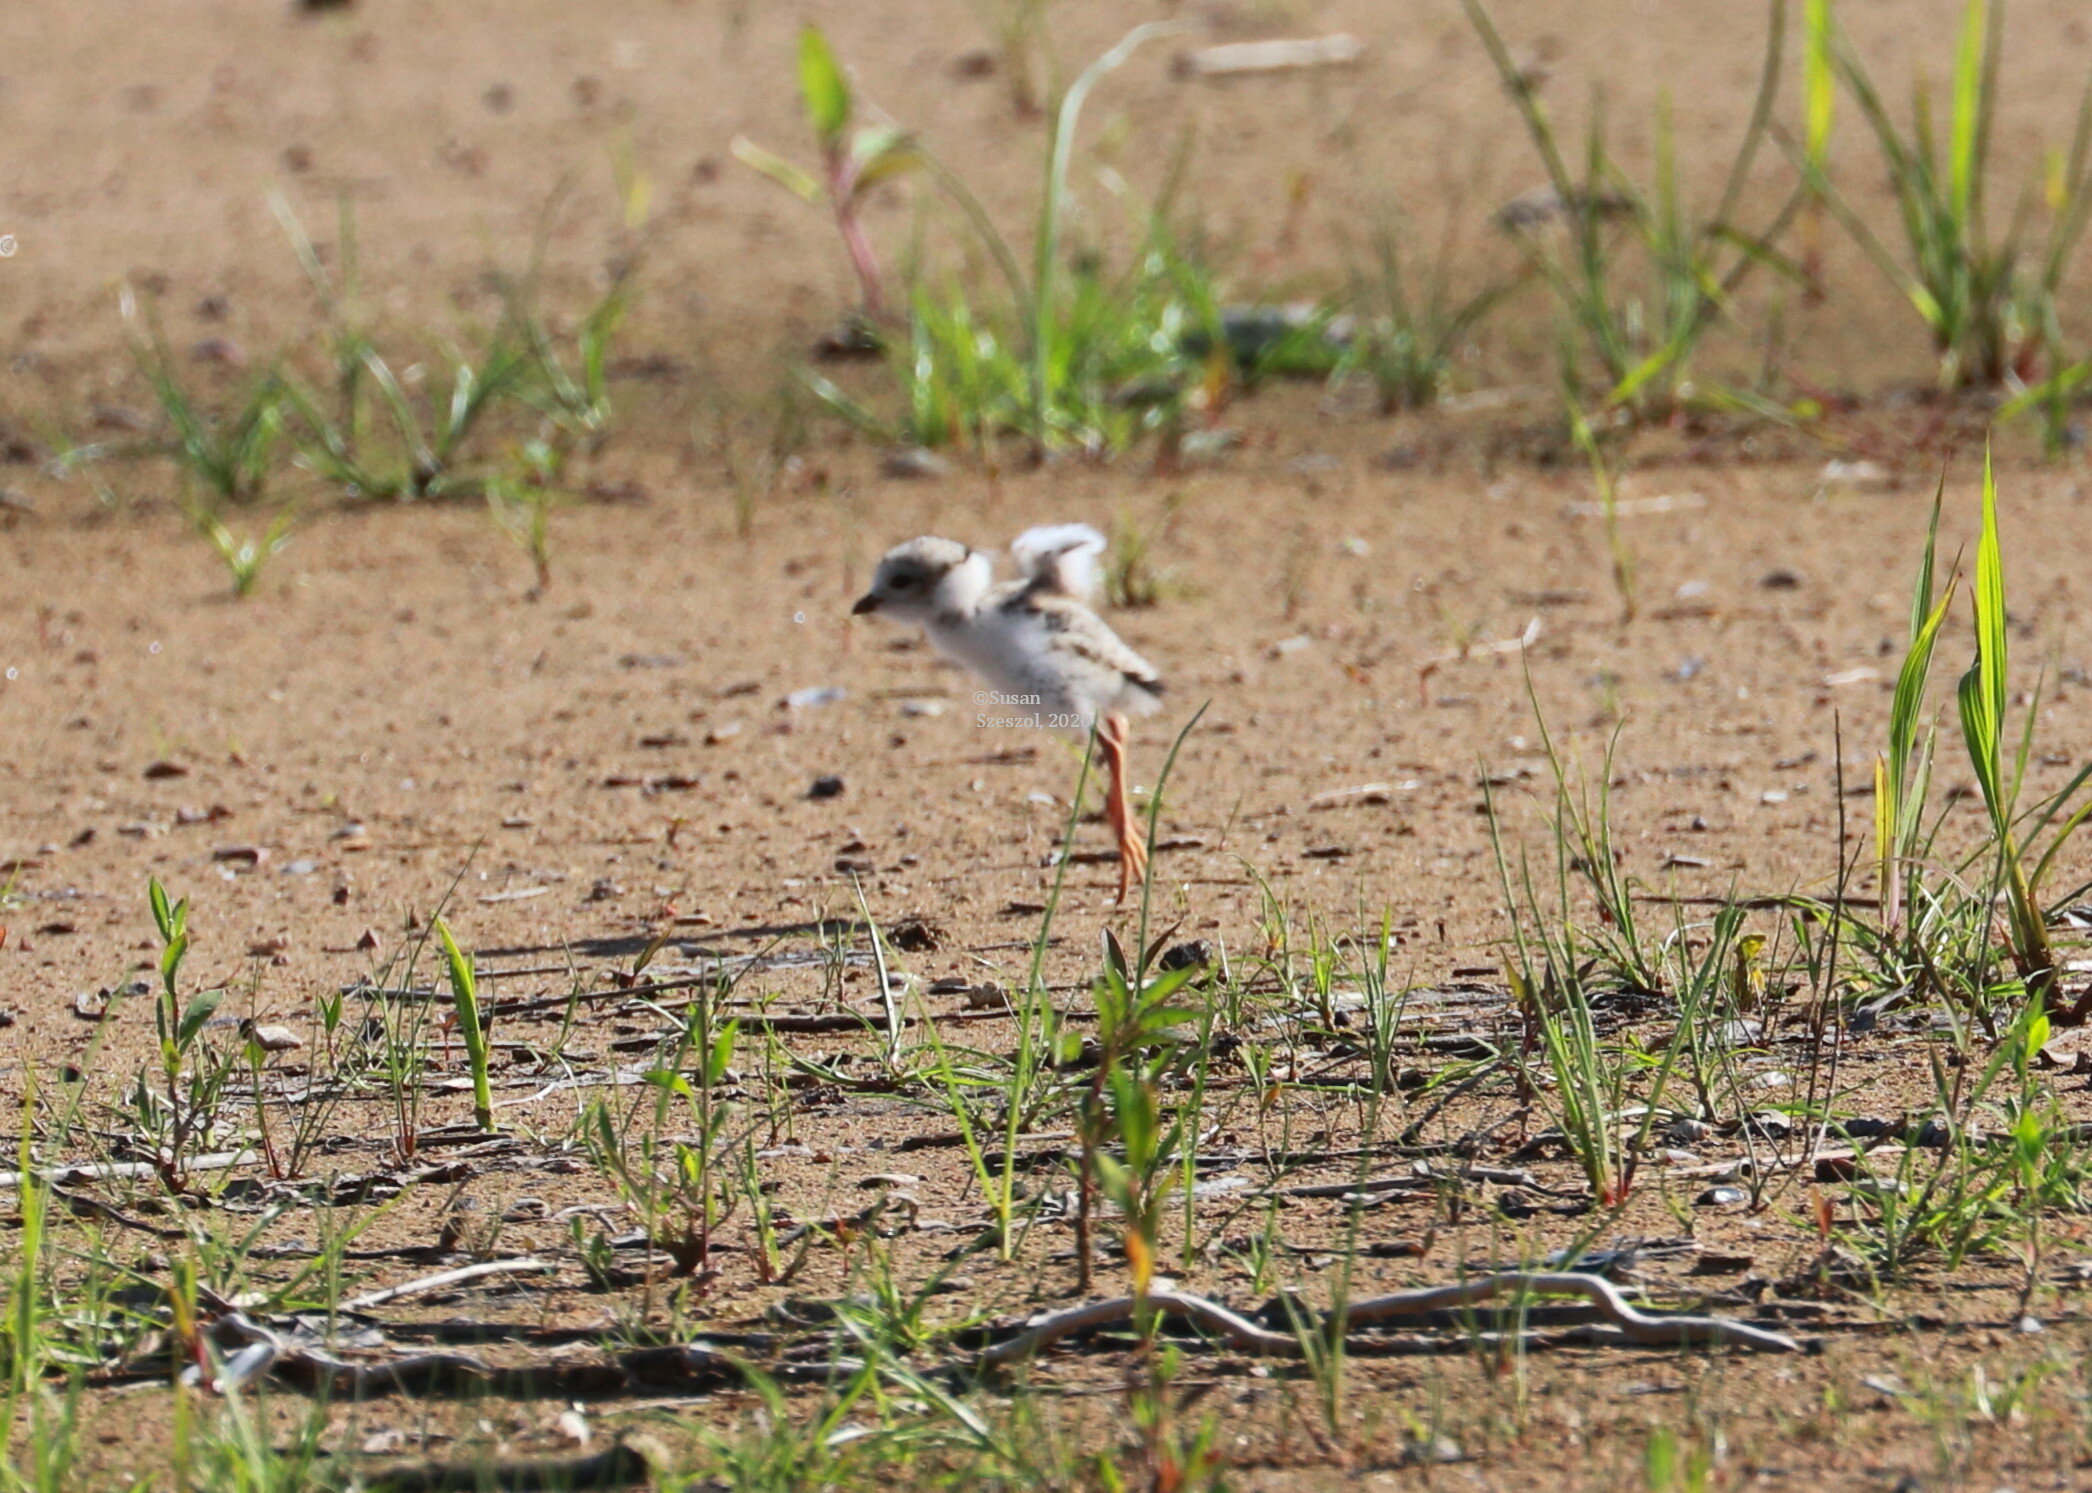 Plover chick trying out its wings